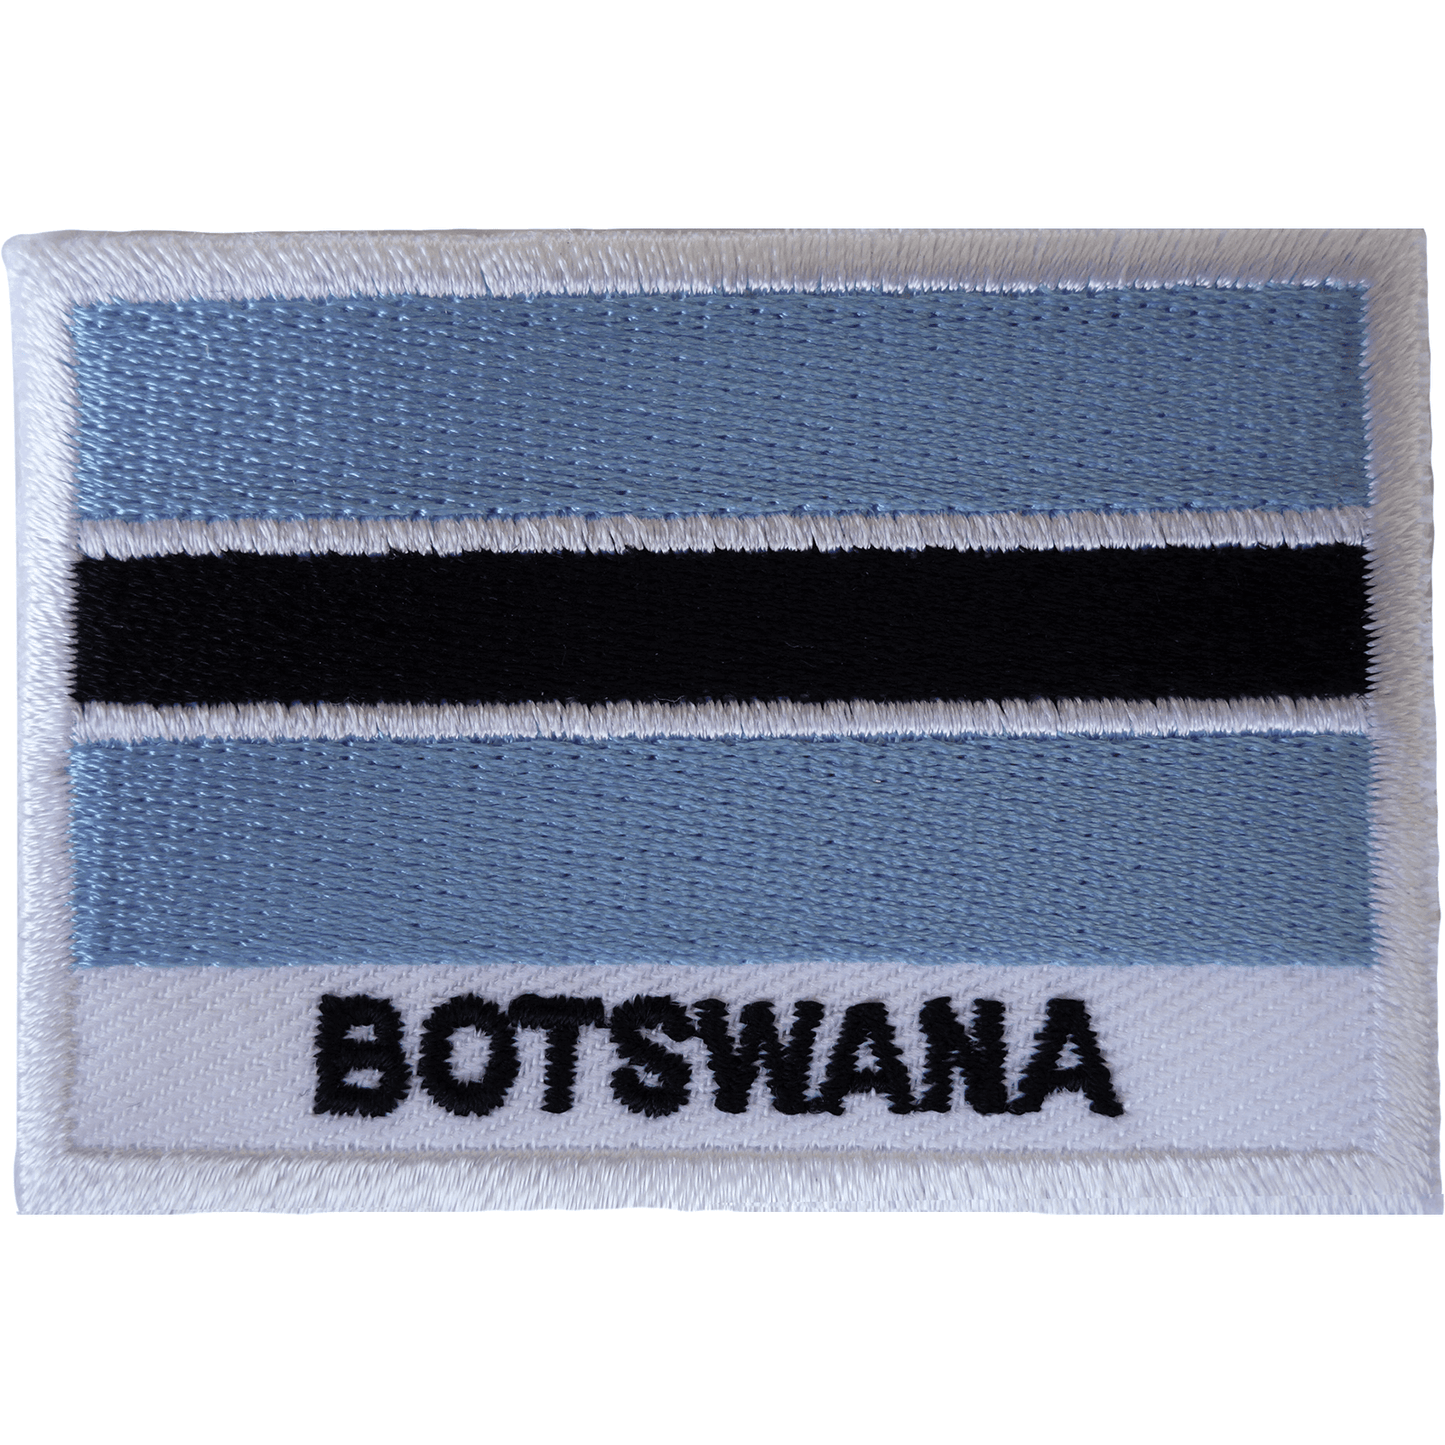 Botswana Flag Iron On Patch Sew On Clothes Bag South Africa Embroidered Badge